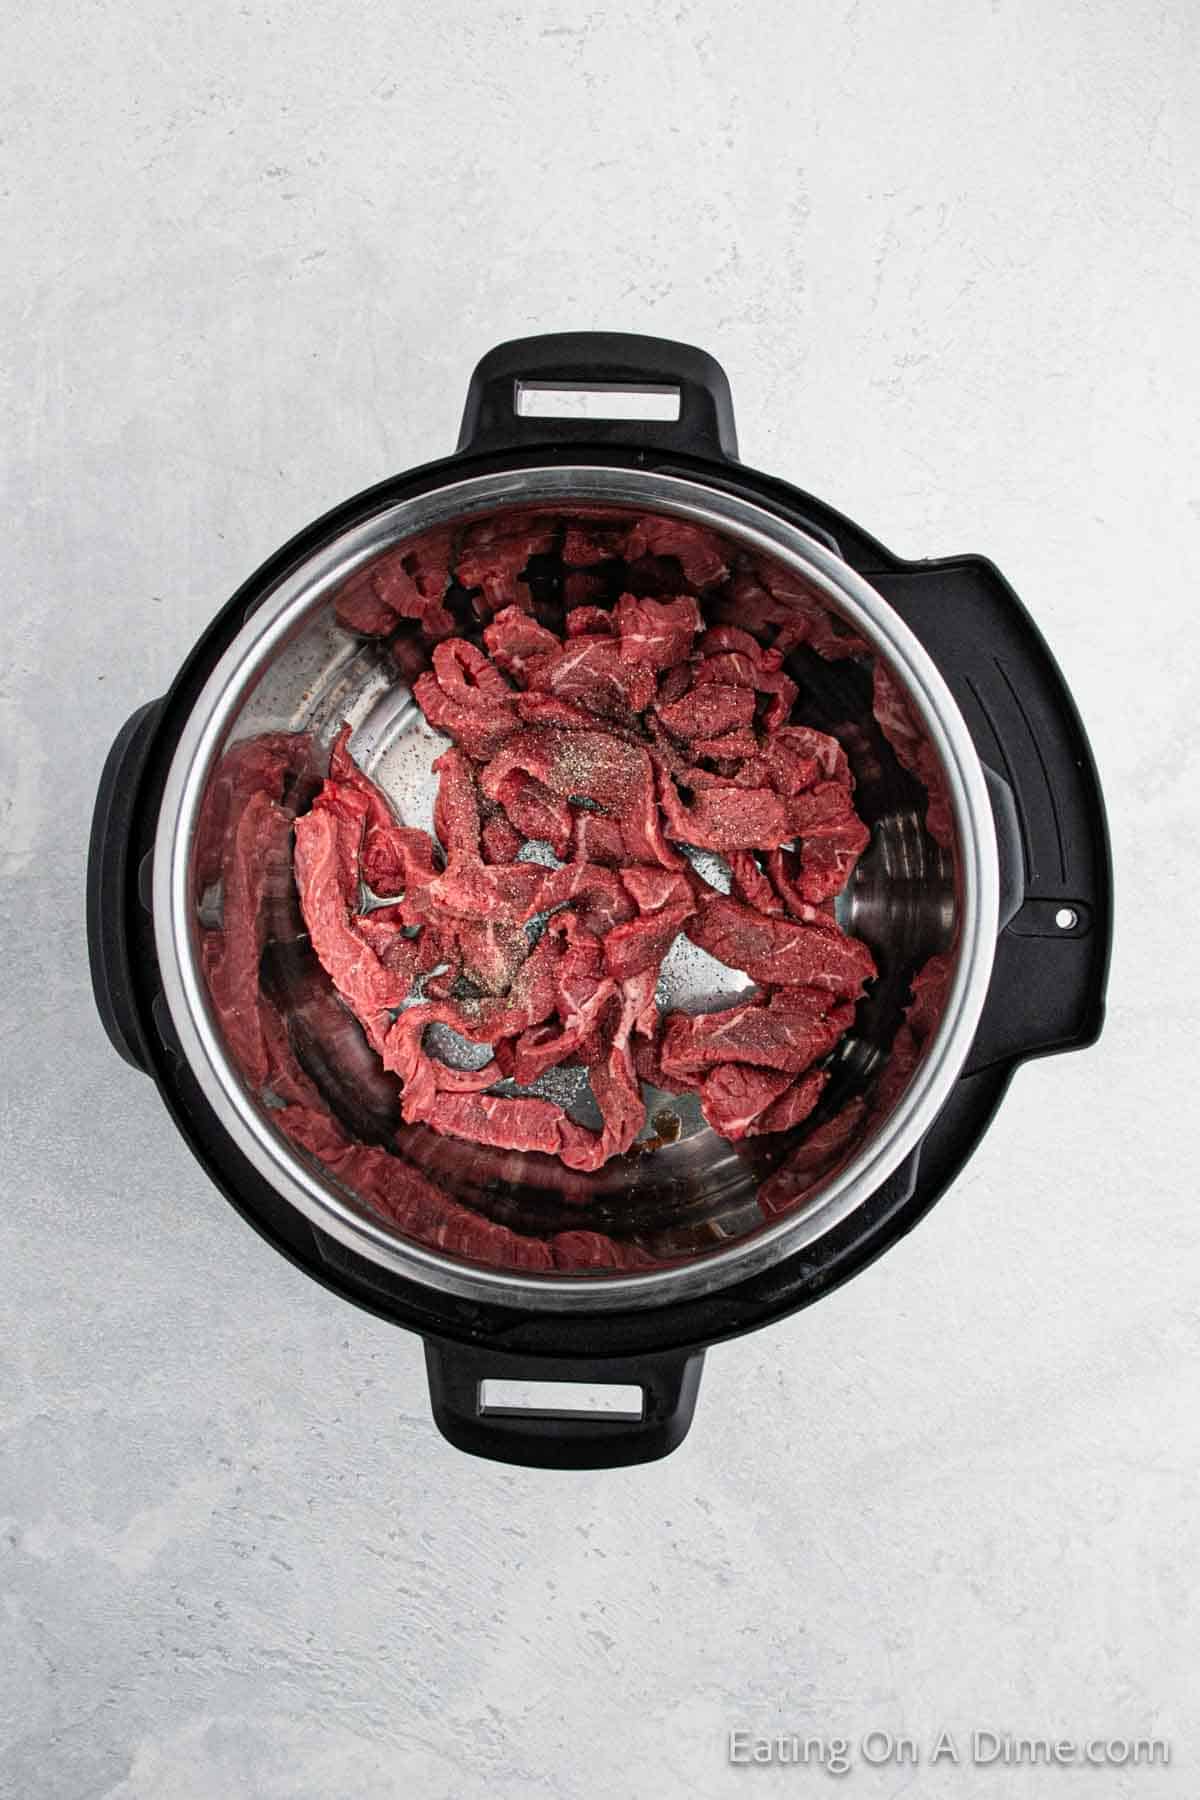 Strips of beef in the instant pot